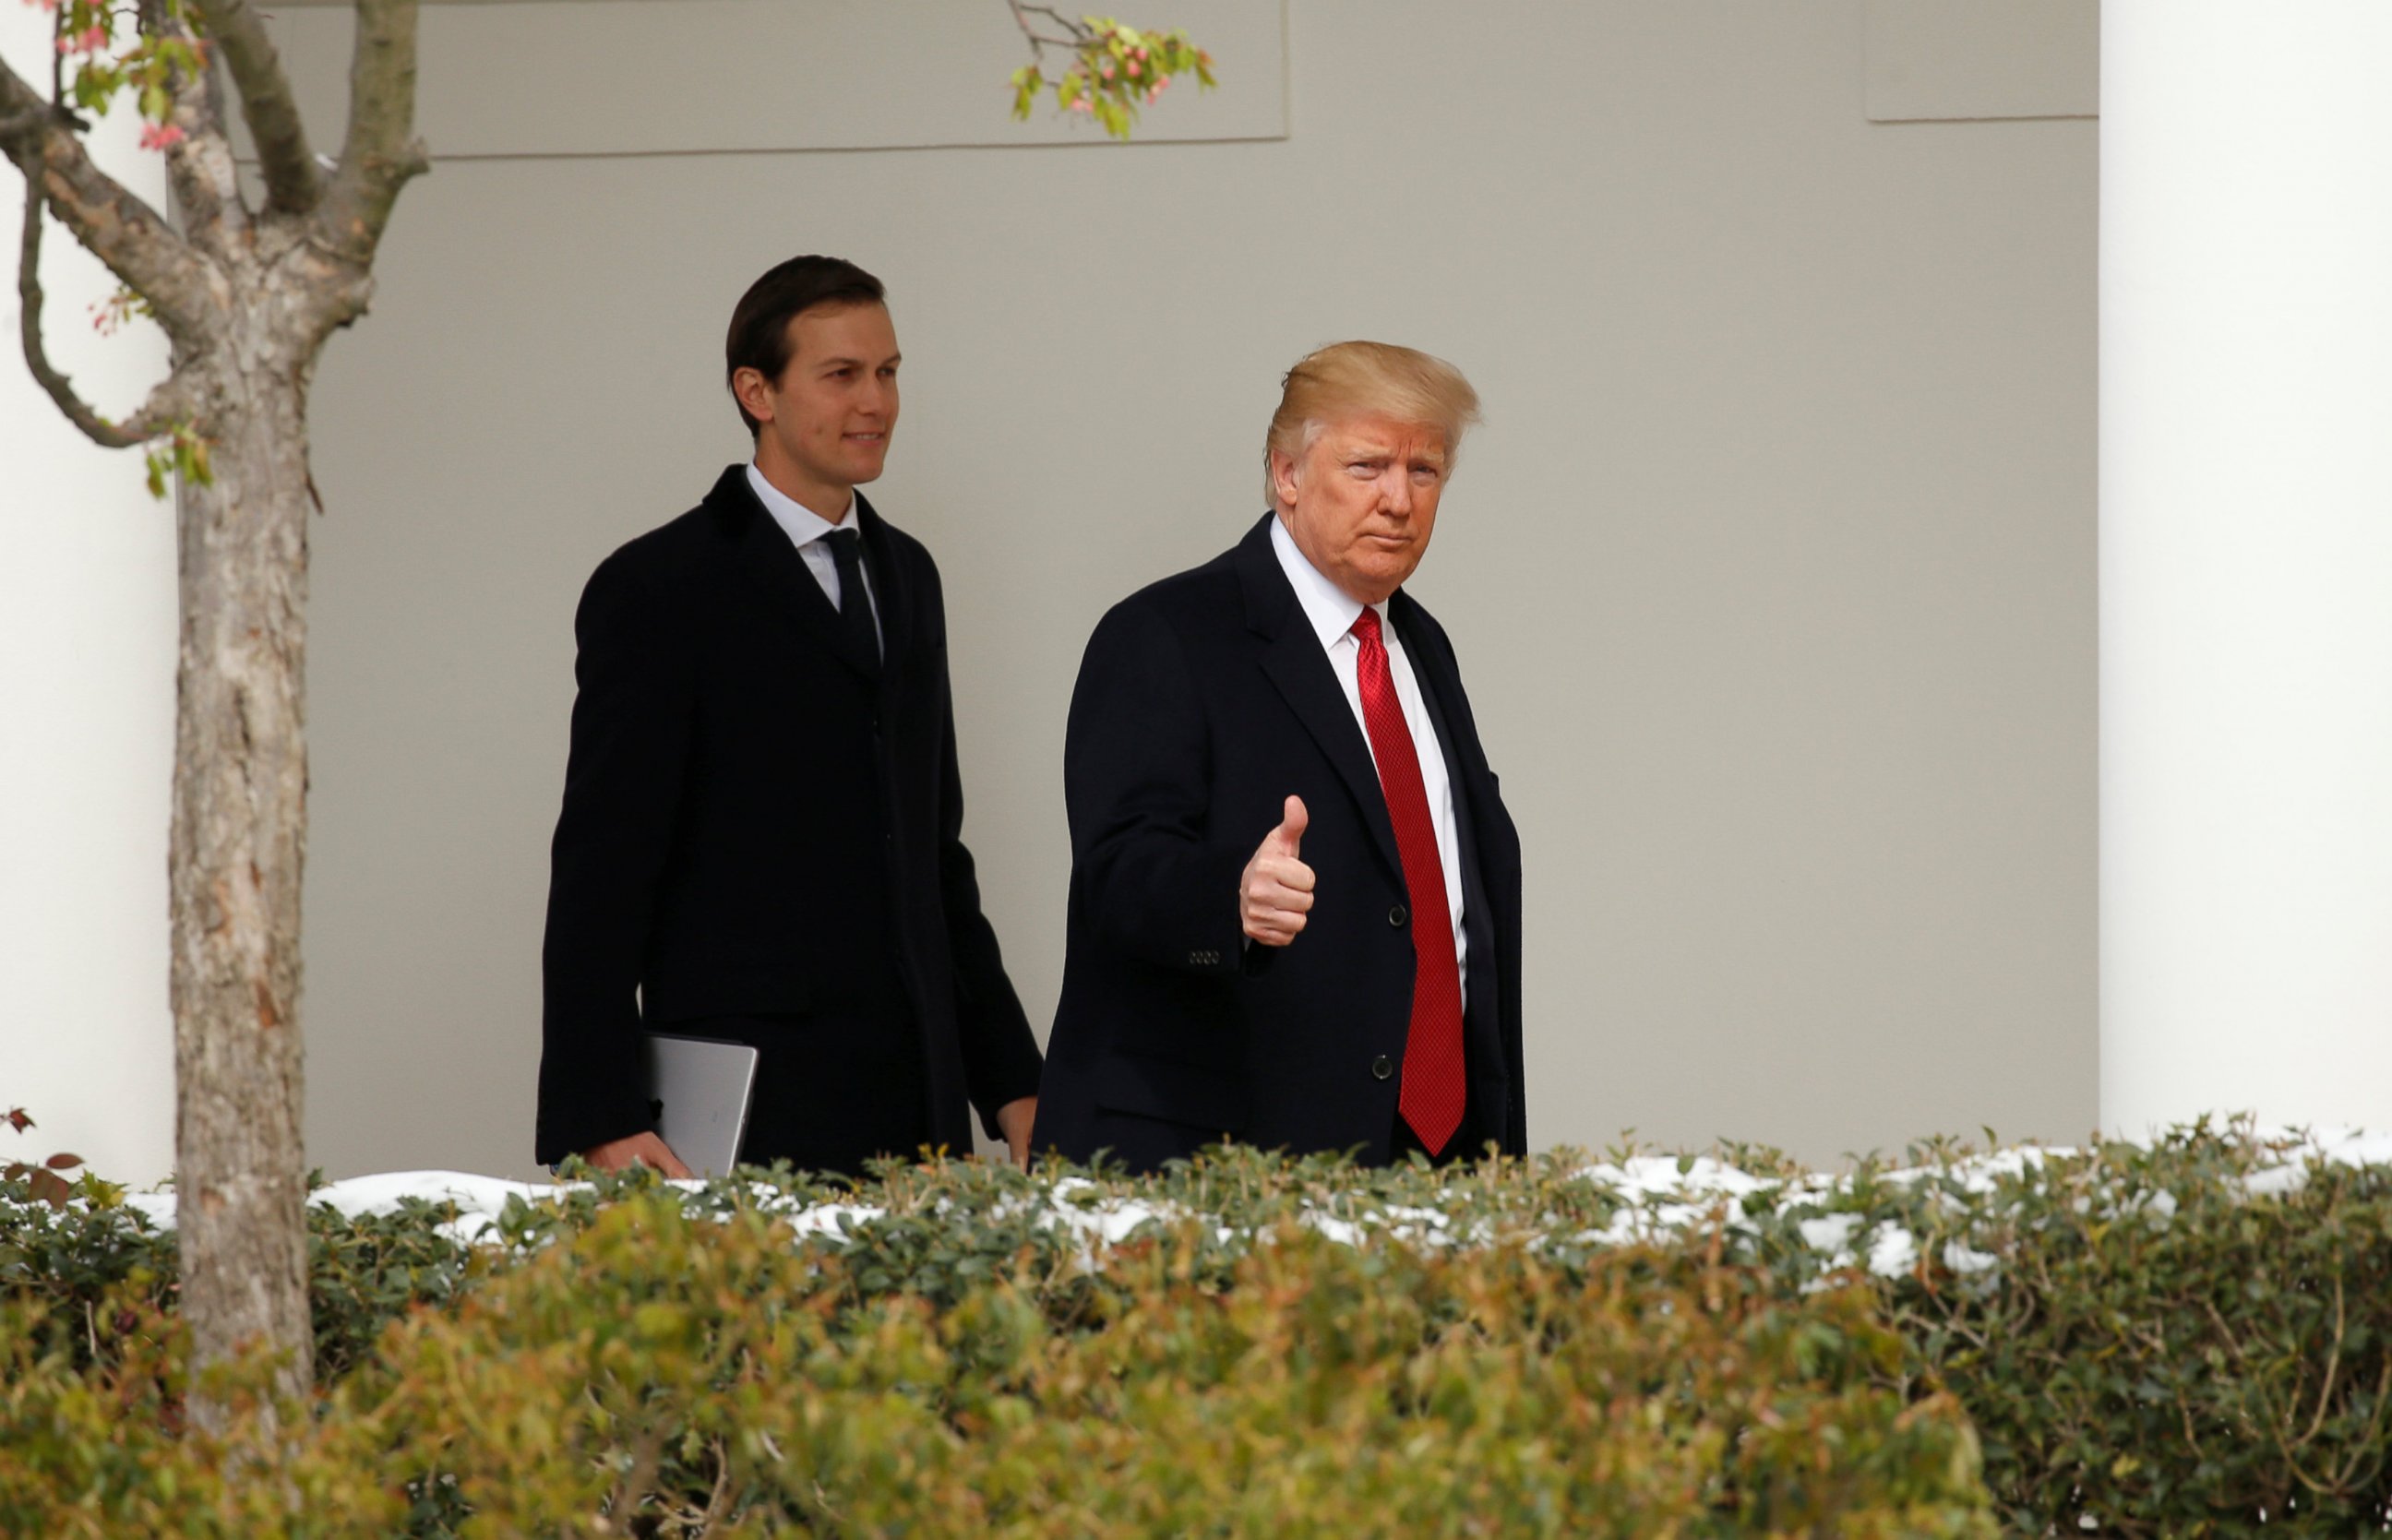 PHOTO: U.S. President Donald Trump gives a thumbs-up as he and White House Senior Advisor Jared Kushner depart the White House in Washington, March 15, 2017. 